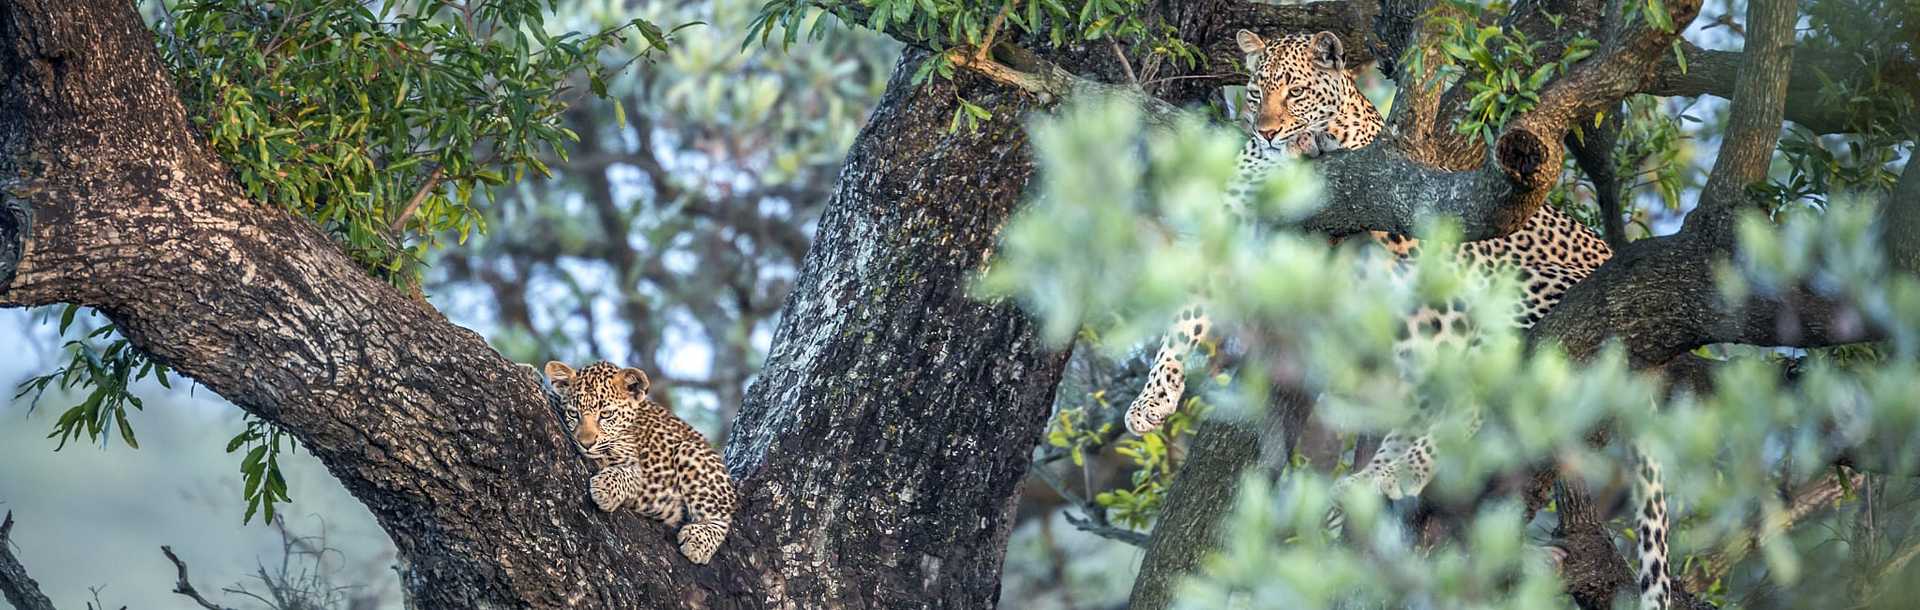 Leopard cubs lounging on tree branches in Kruger National Park, South Africa